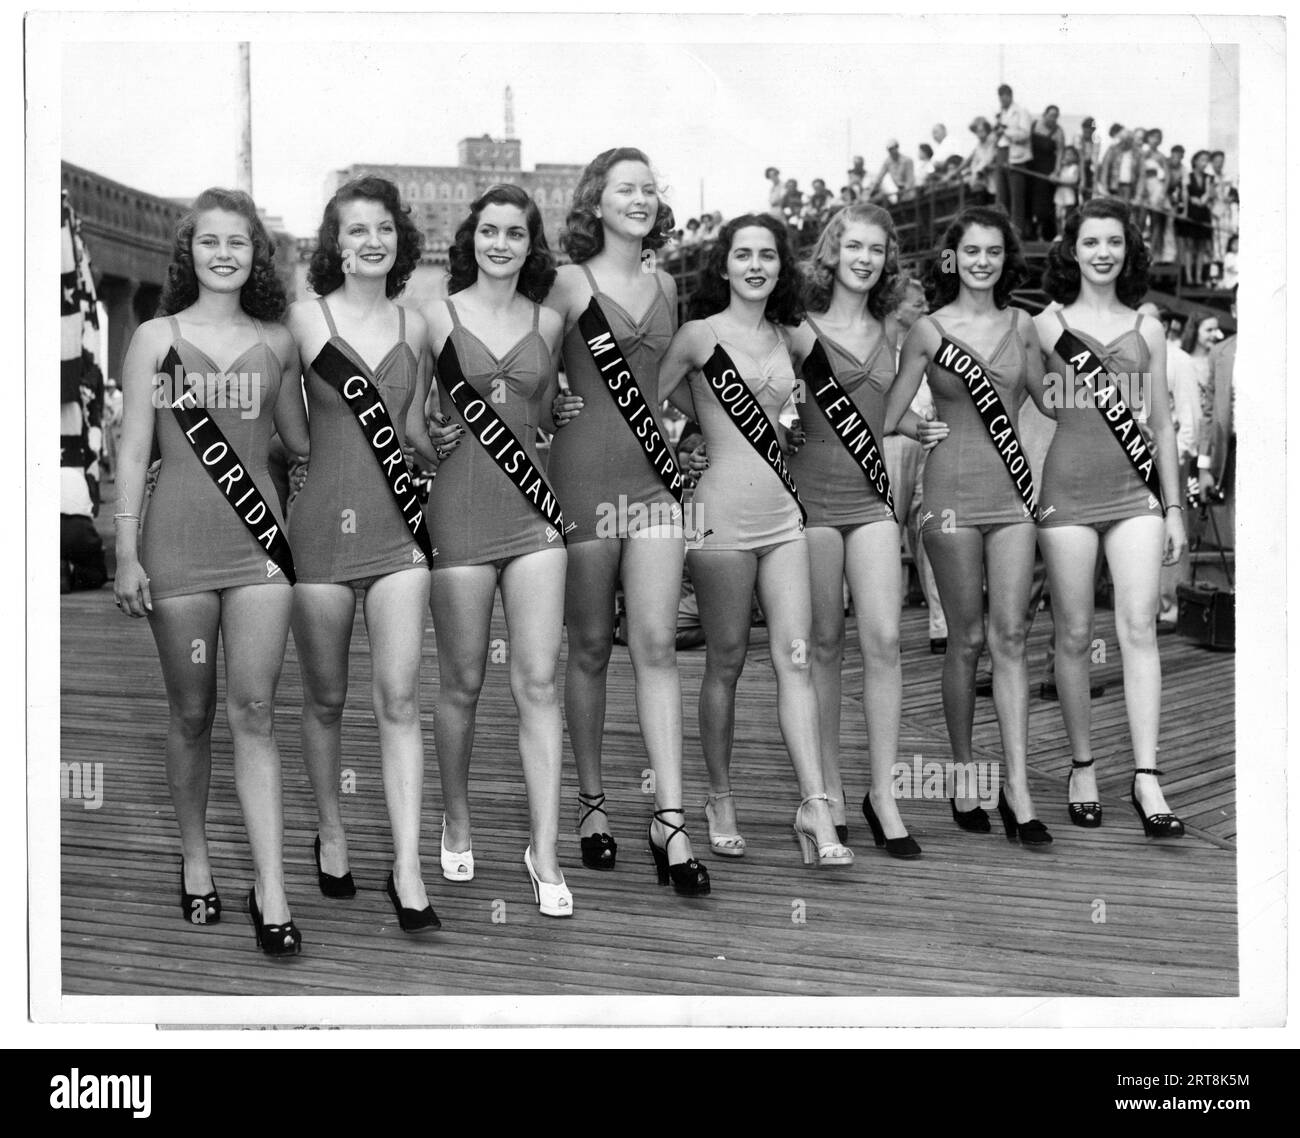 Contestants in a 1940s Miss American contest pose for publicity photographs on the Boardwalk in Atlantic City, New Jersey. Stock Photo